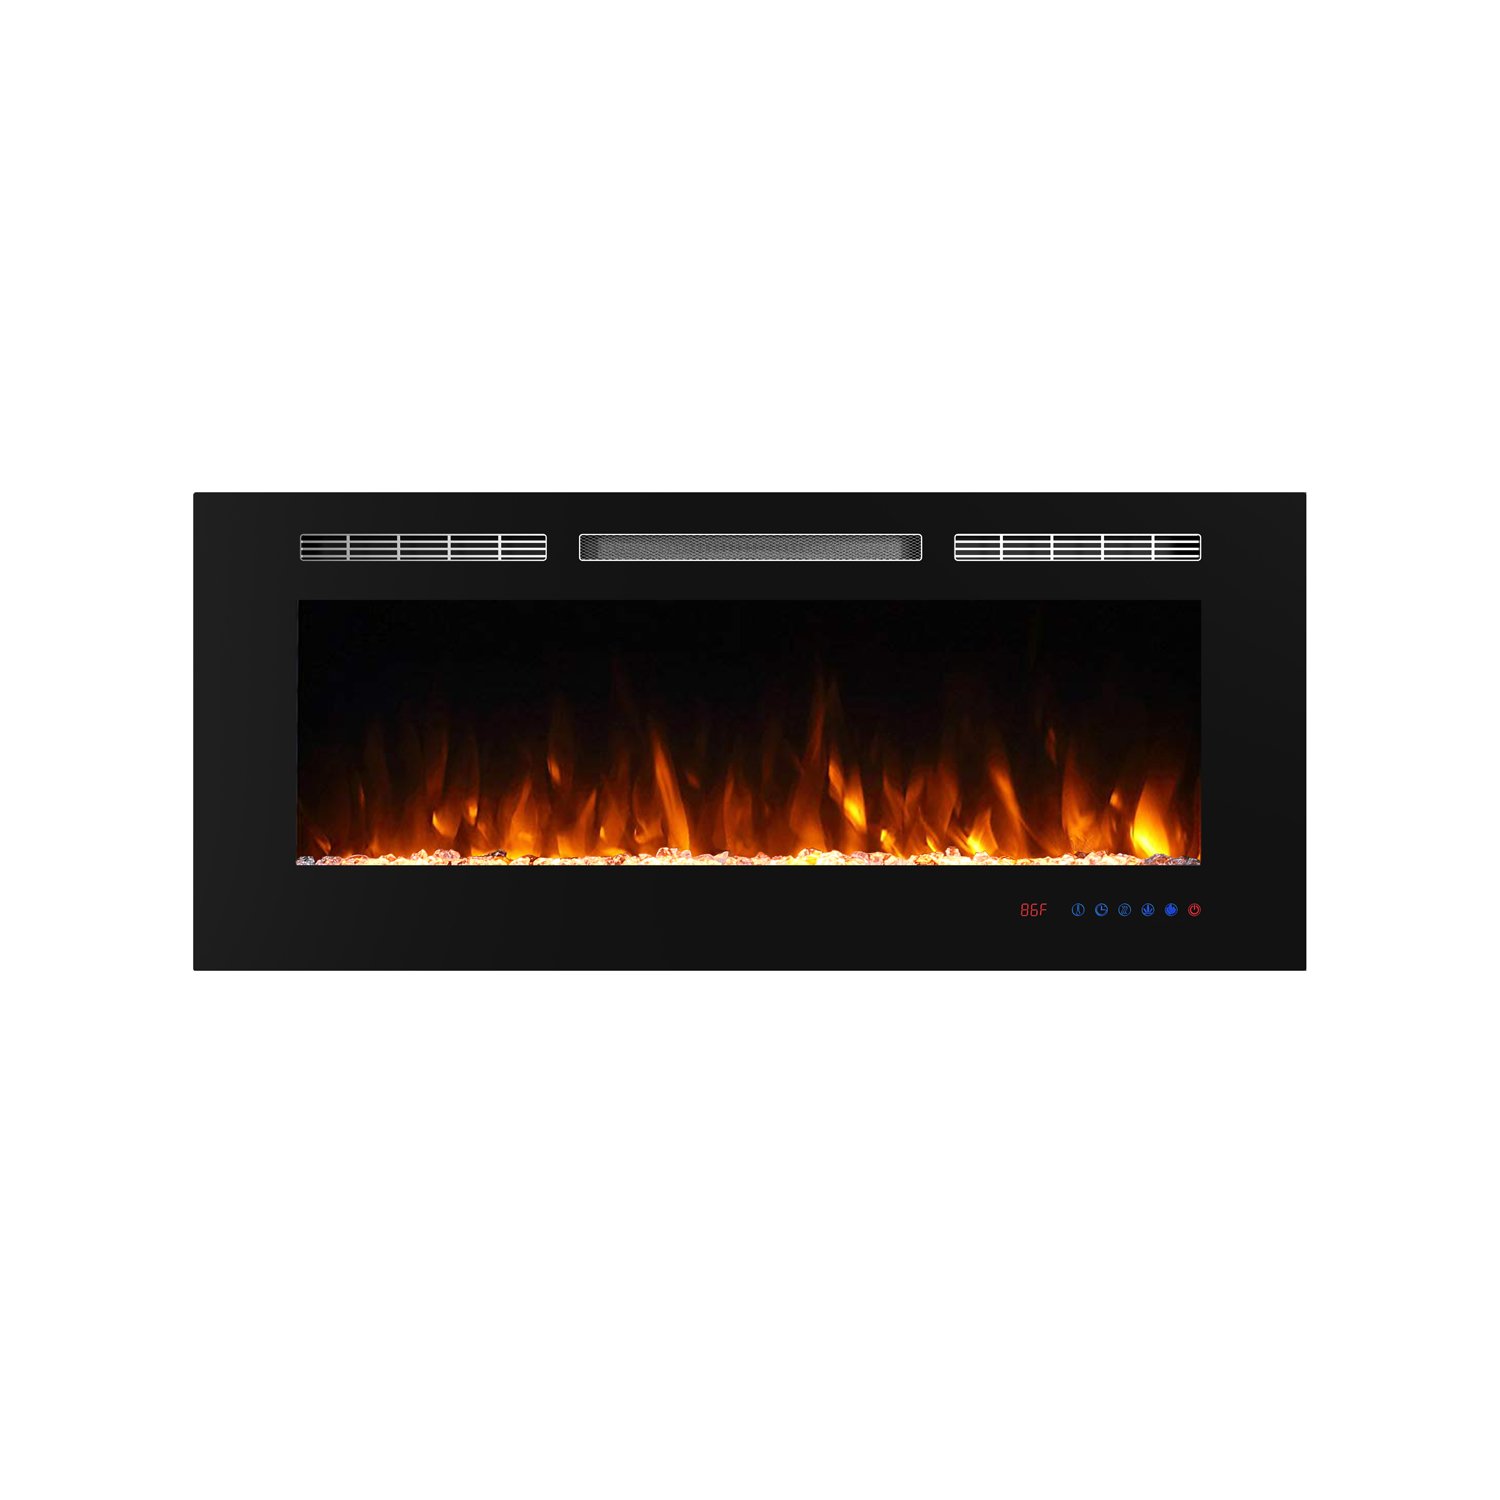 Recessed Electric Fireplace Insert with Remote Control, Touch Screen, 750/1500W, Black-CASAINC